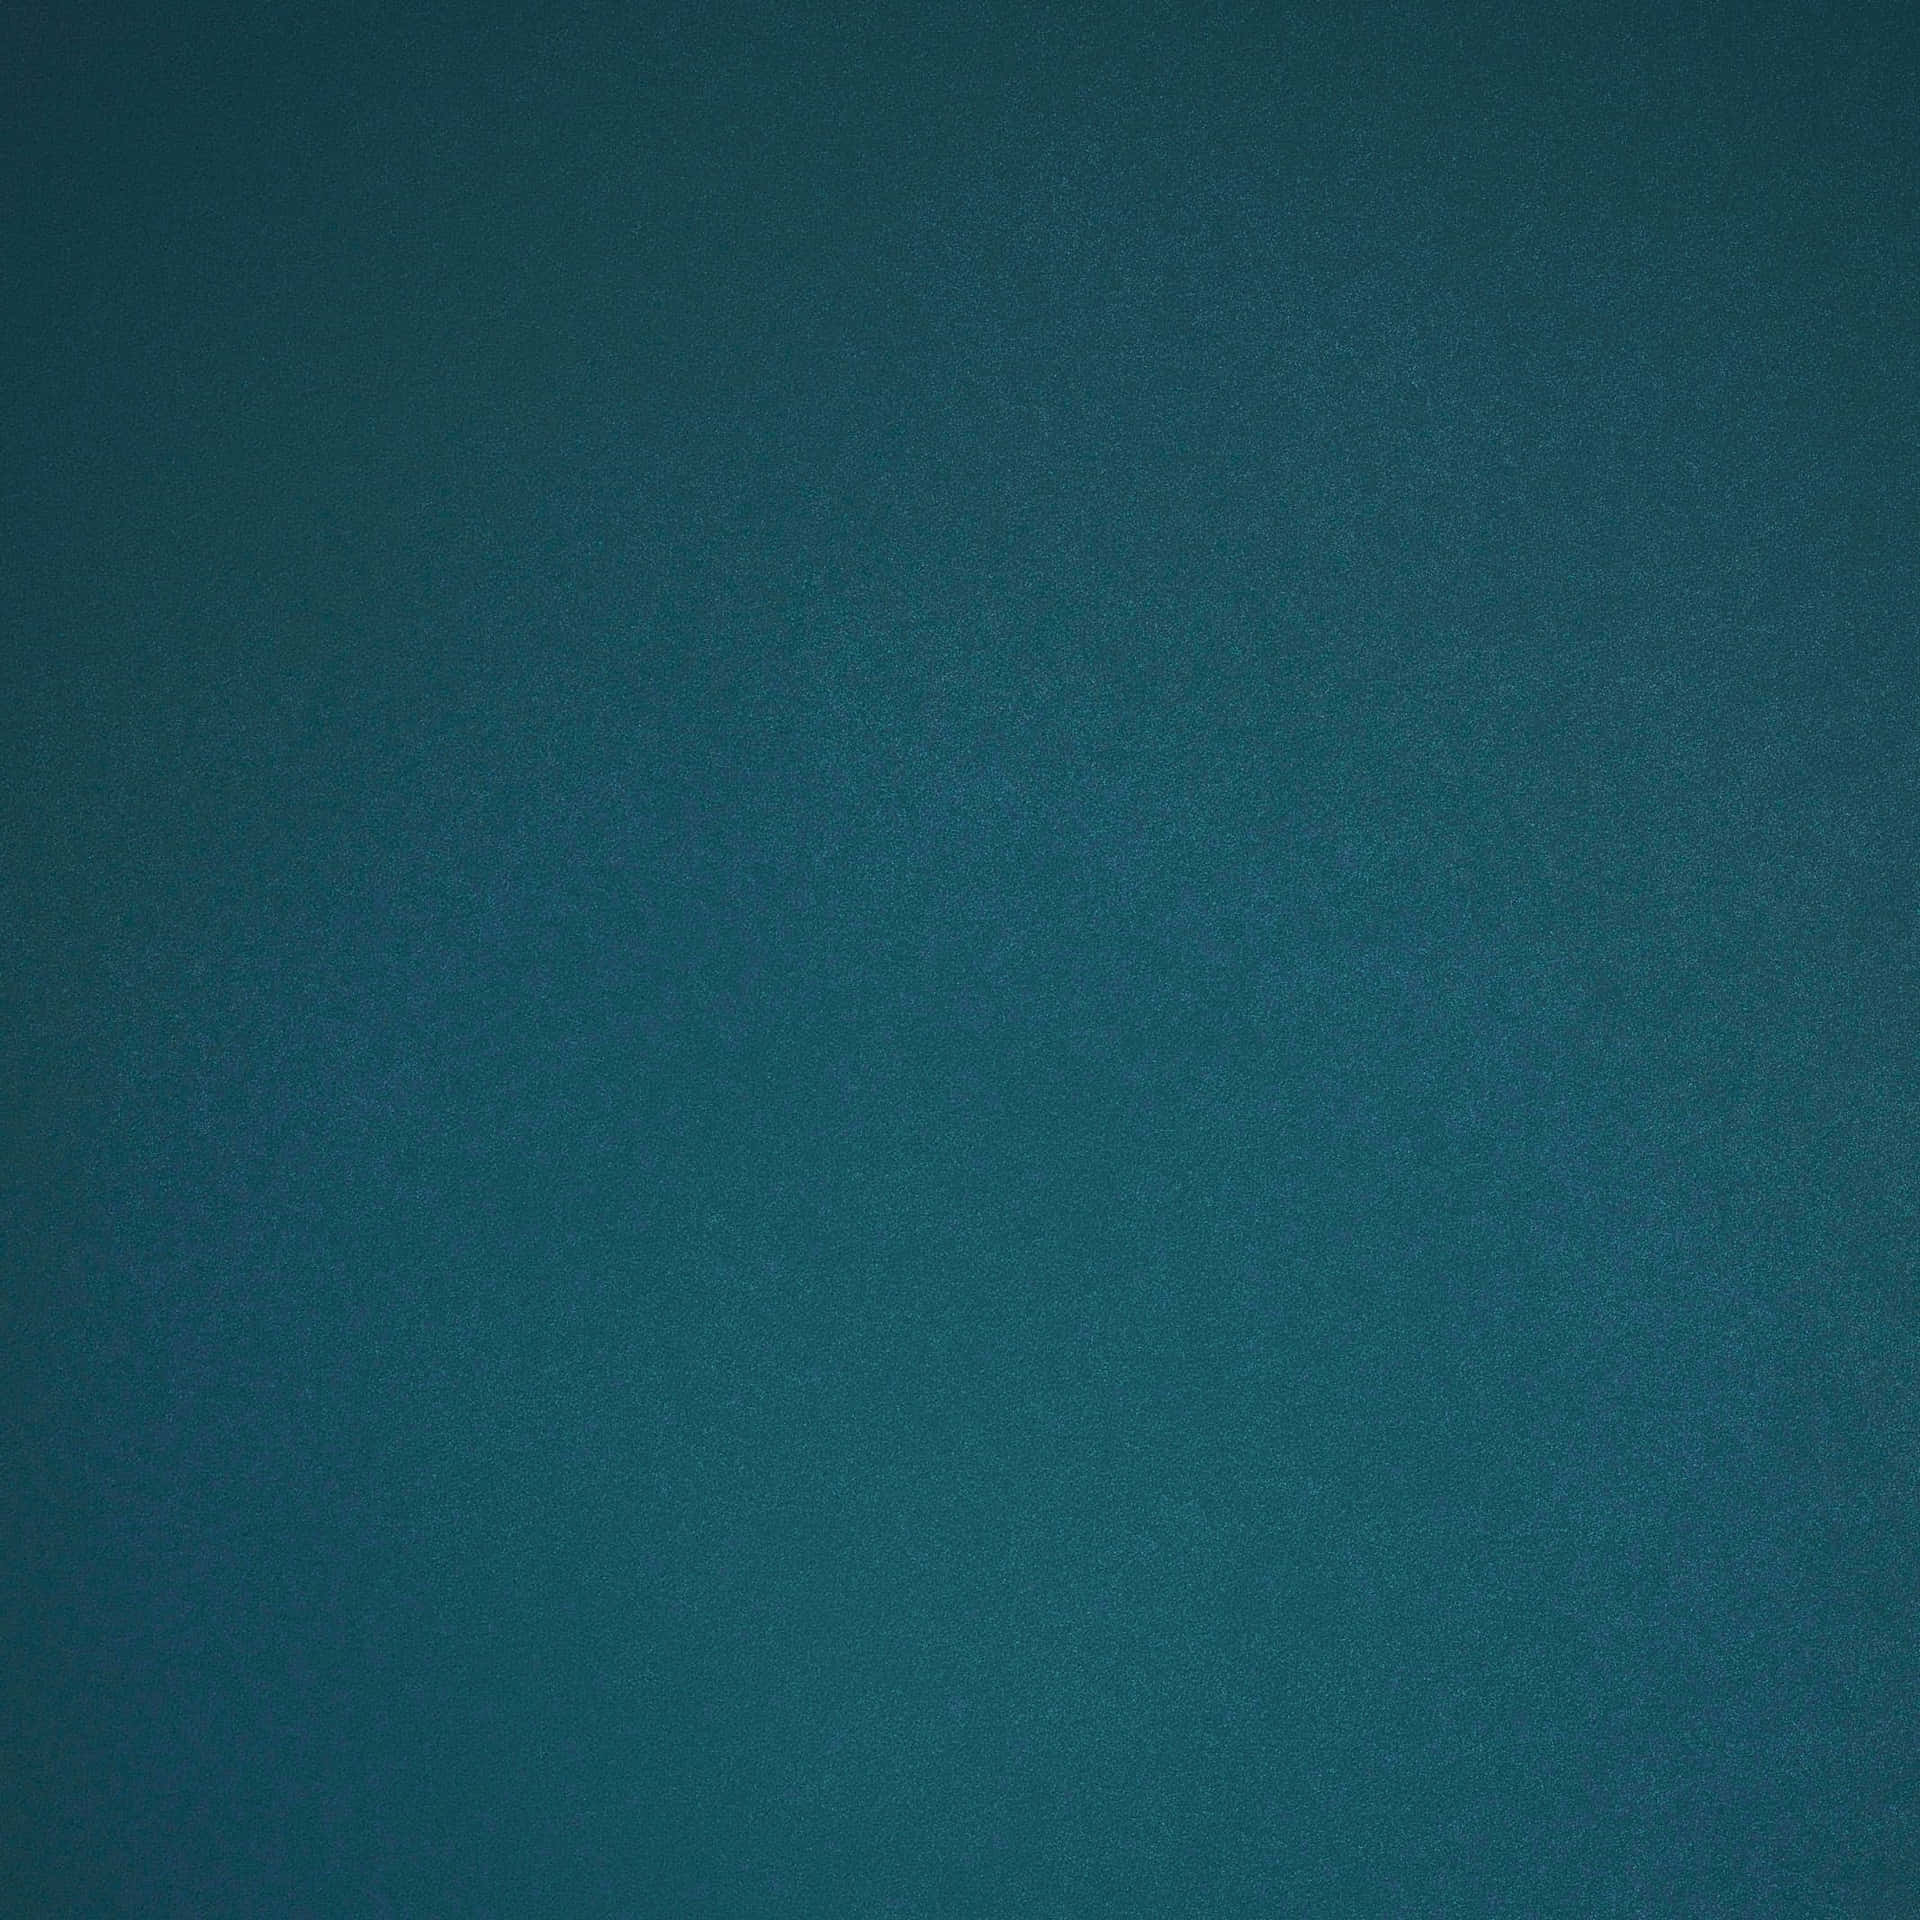 A vibrant dual-tone background of blue and grey